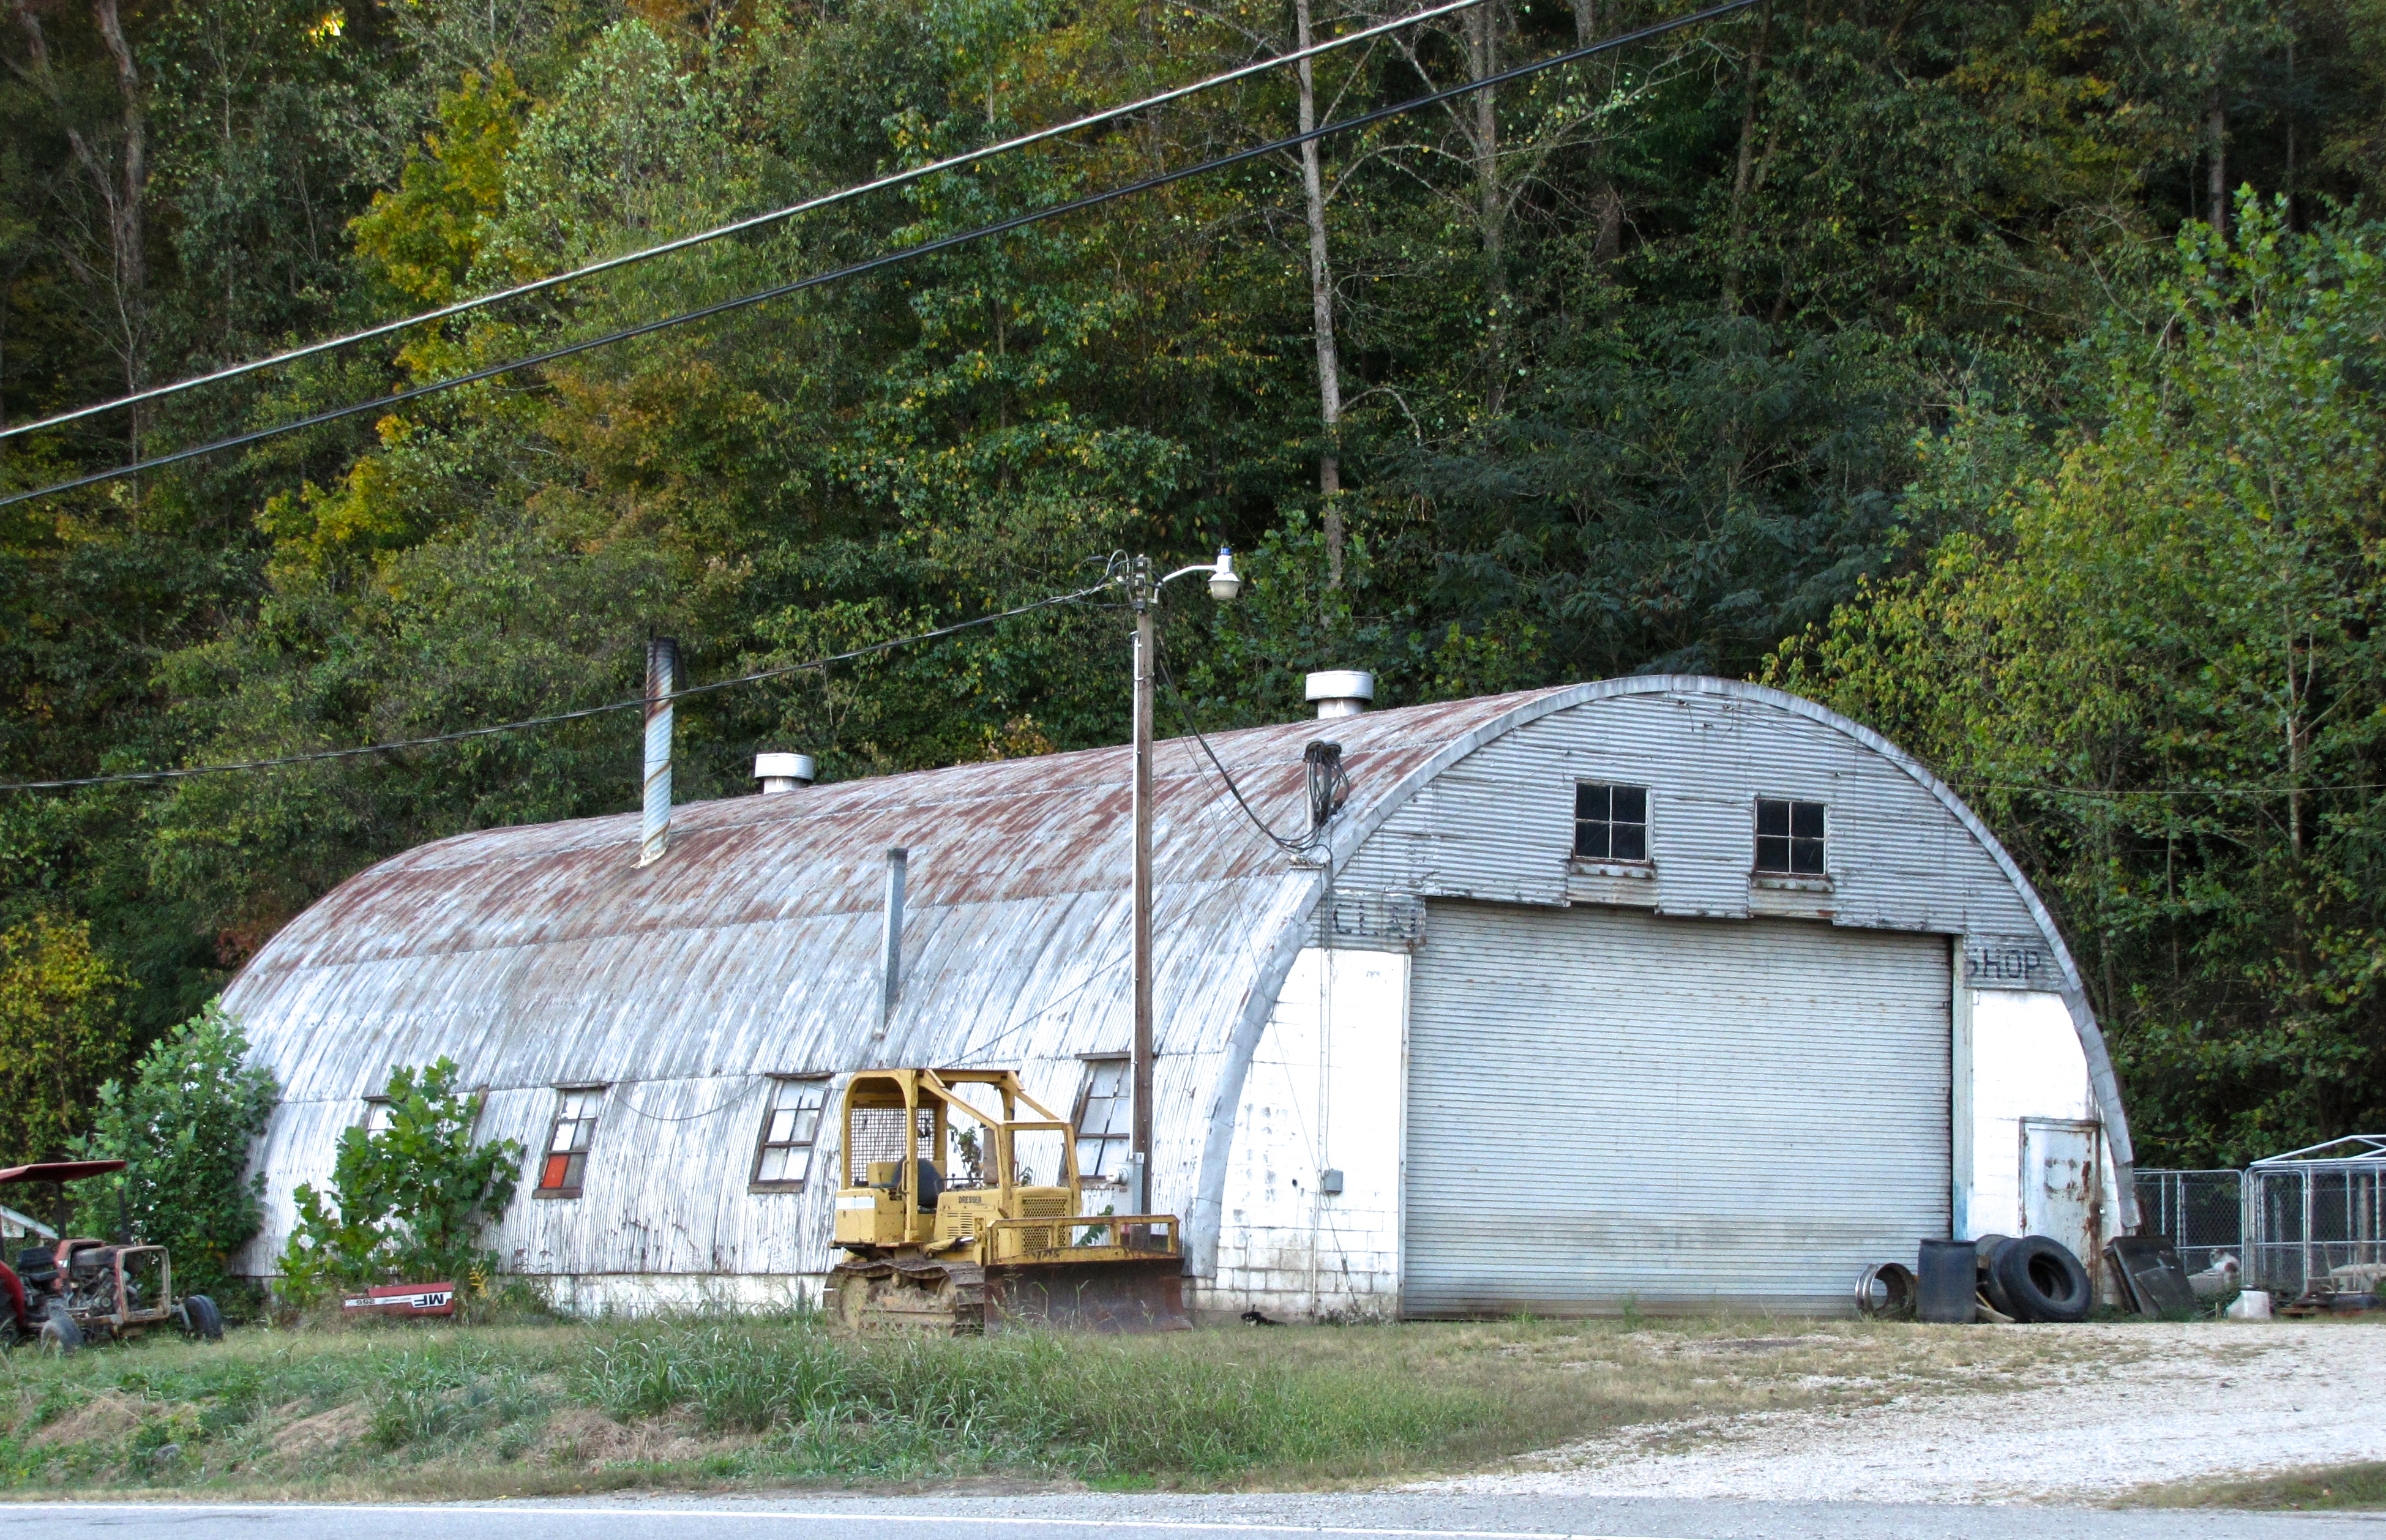 quonset hut in Terms Of Service, NC